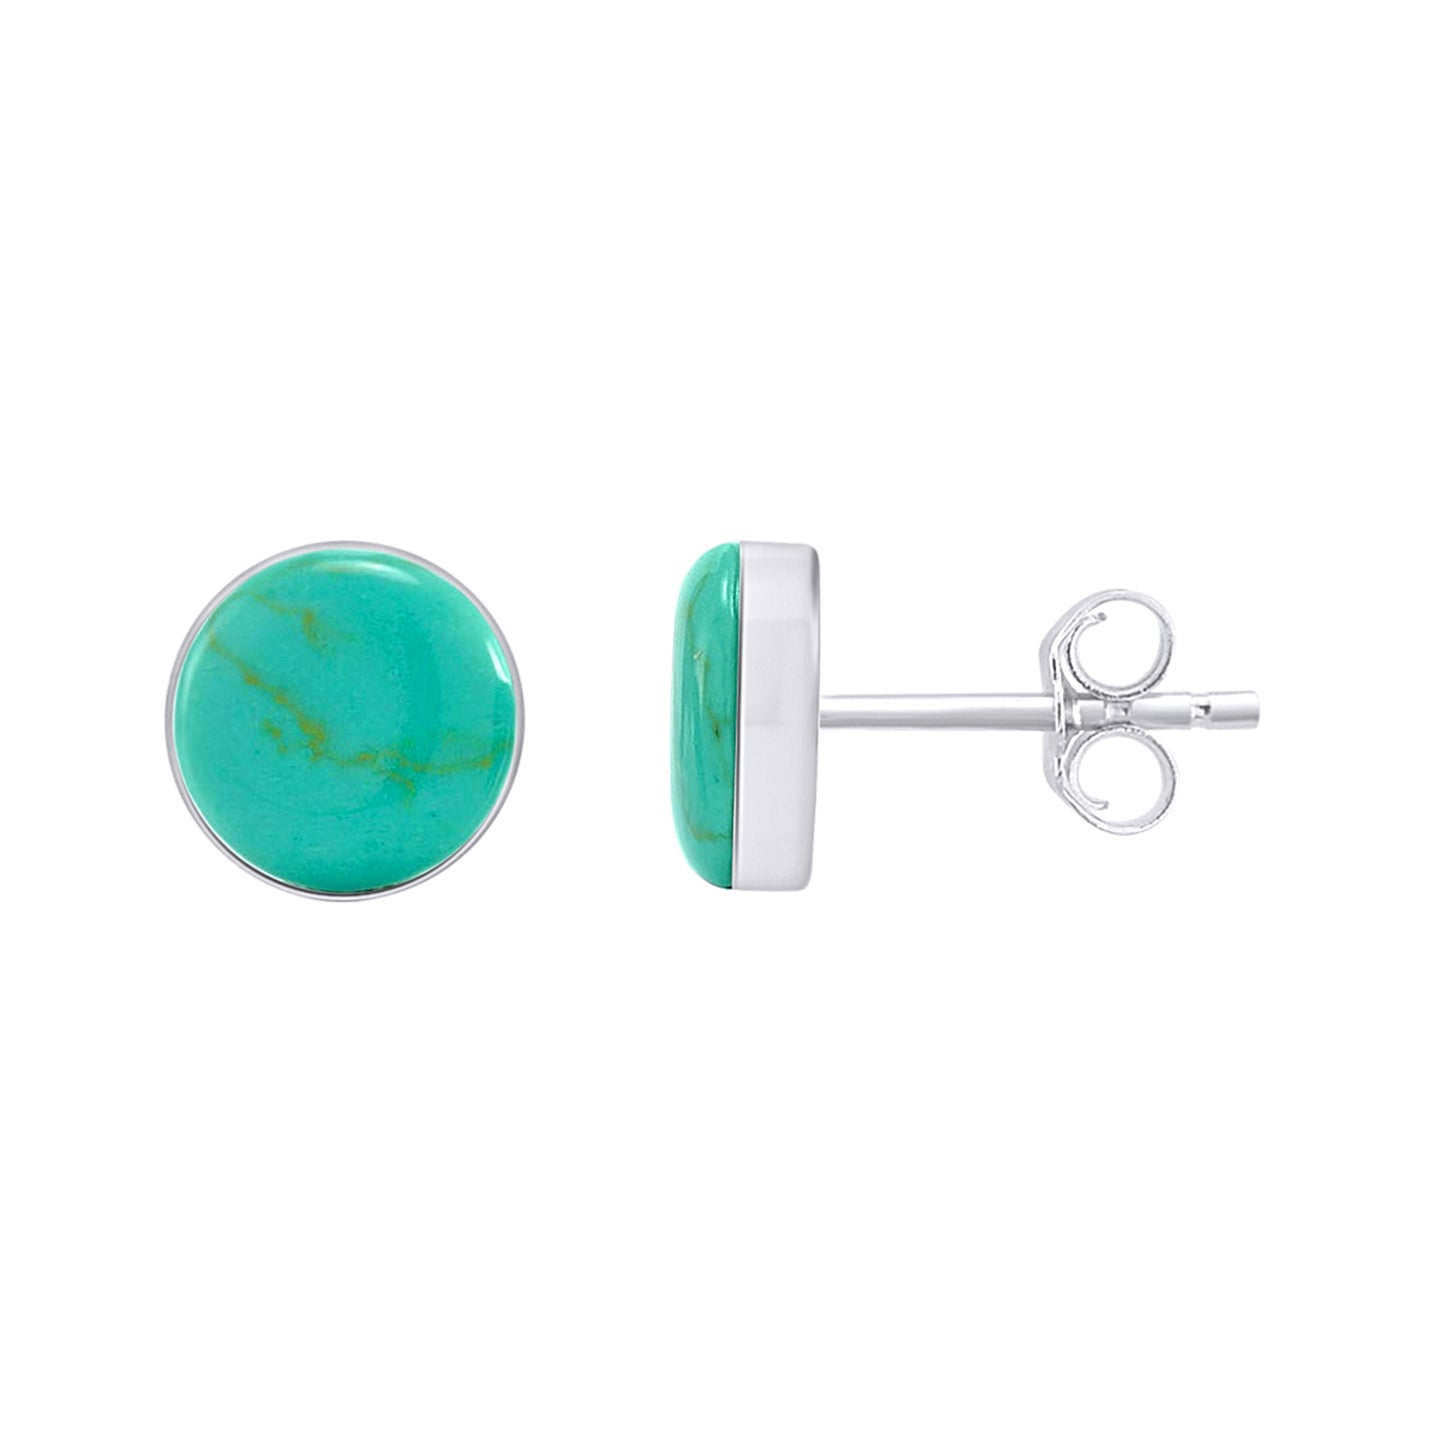 Round Turquoise Bezel Set Dome Button Stud Earrings For Women In 925 Sterling Silver